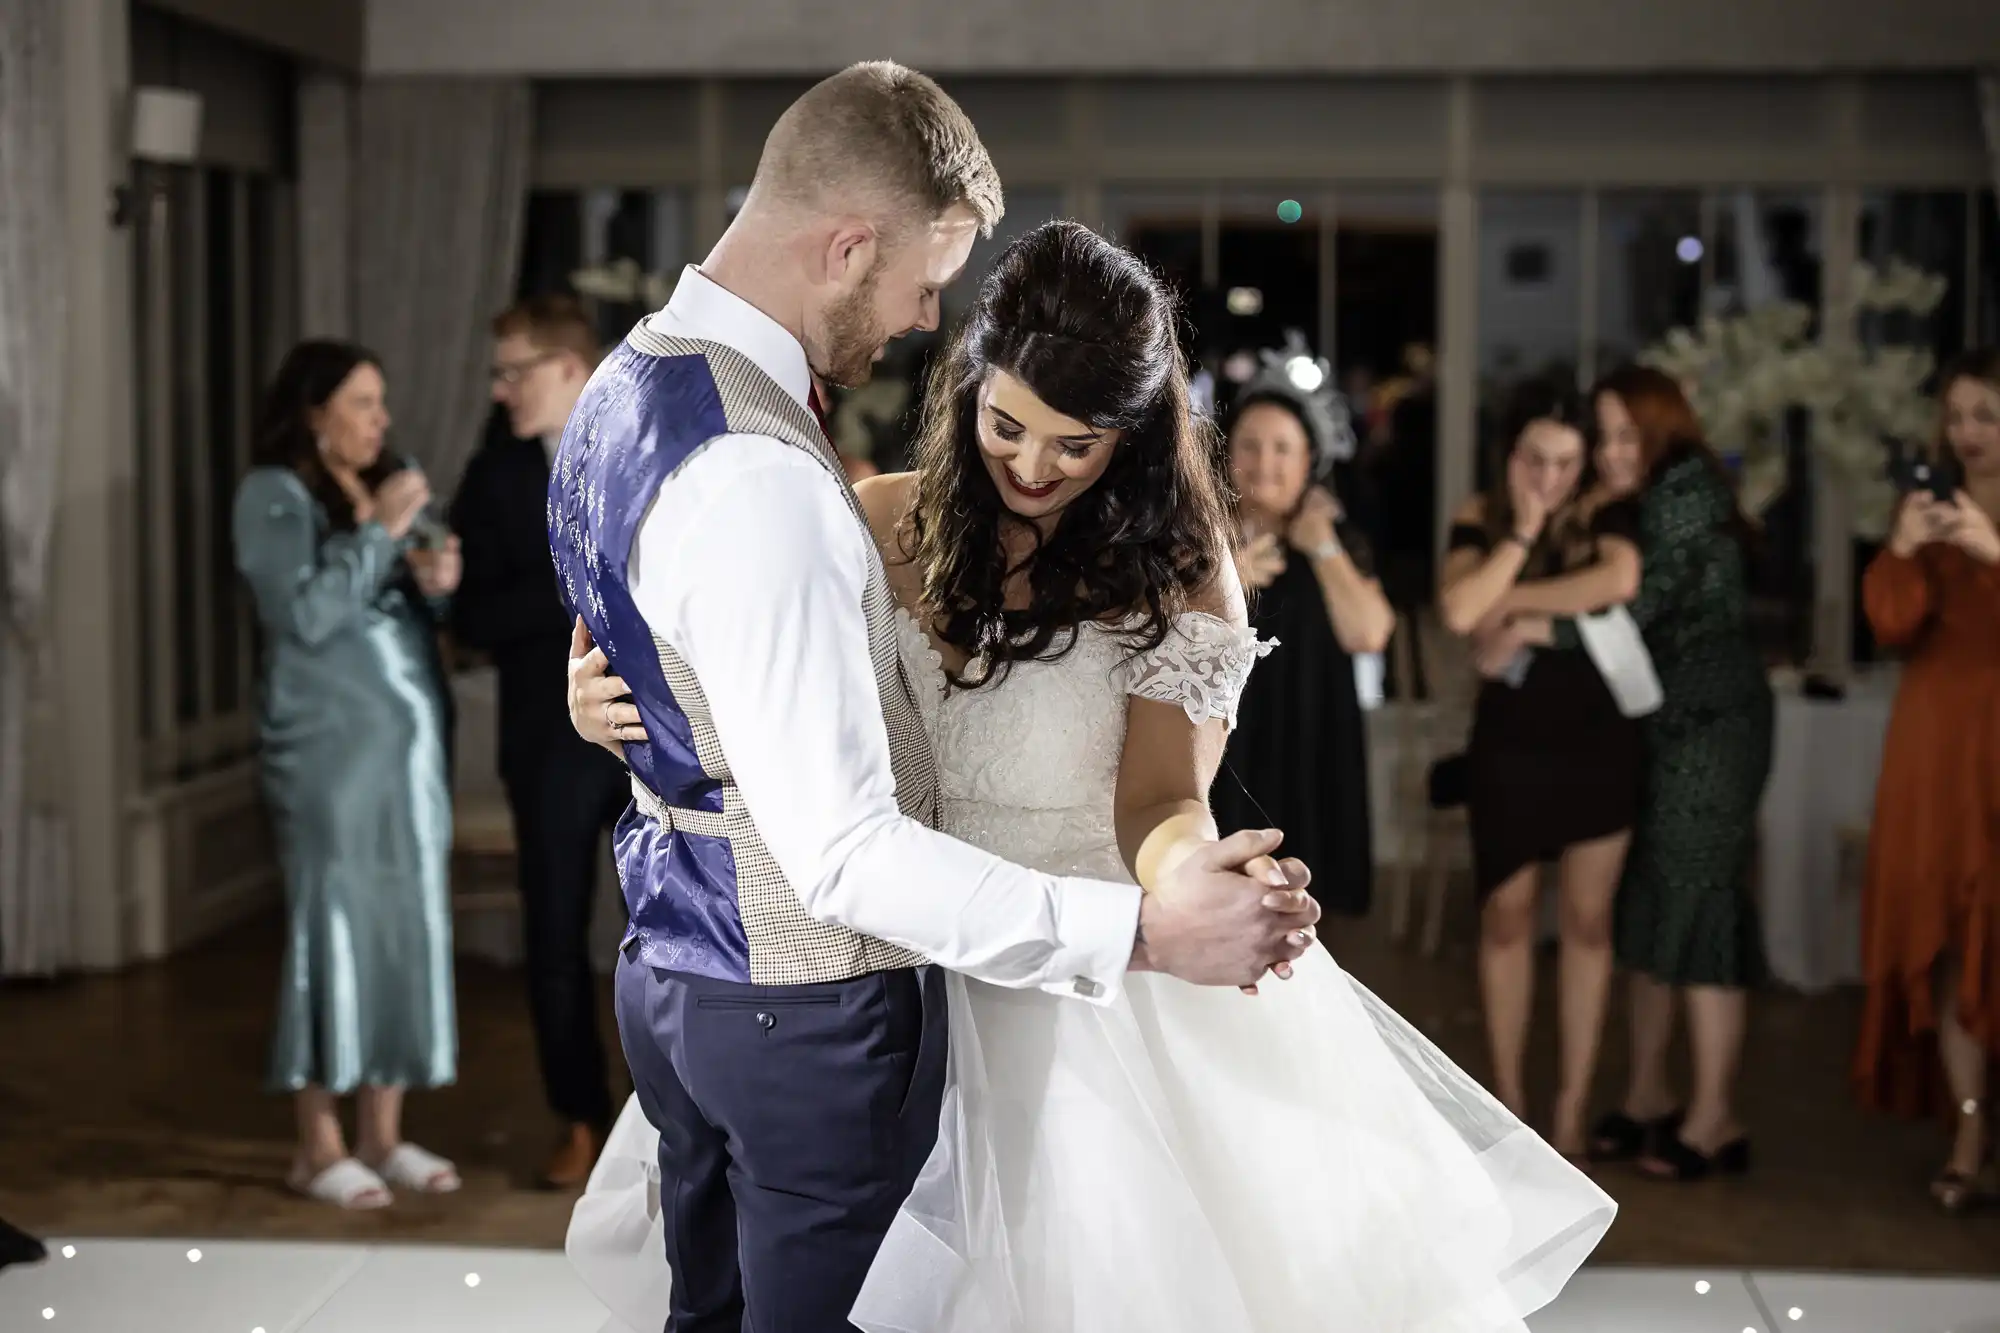 A bride and groom share their first dance at their wedding reception, smiling and holding hands, while guests in the background watch and take photos.